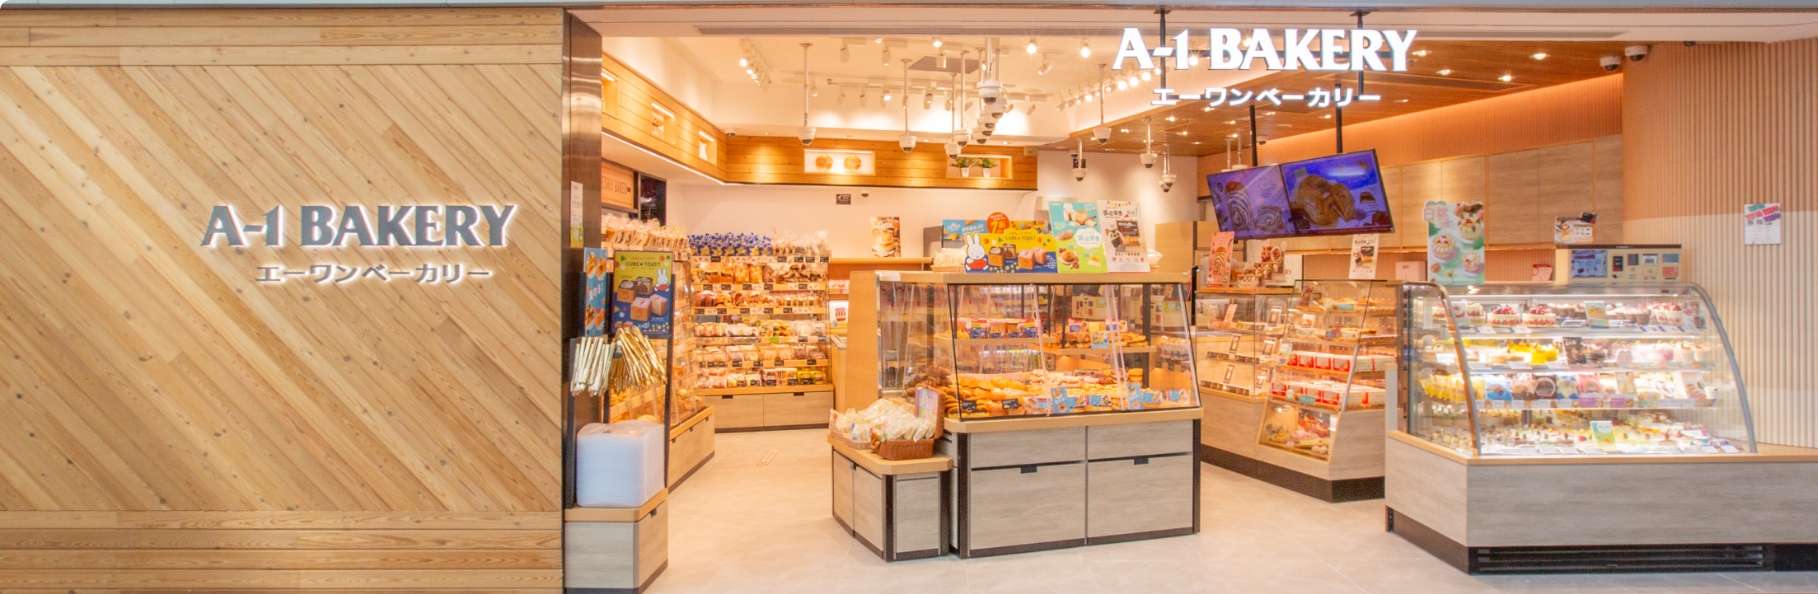 About A-1 BAKERY | Natural, Healthy and Delicious.